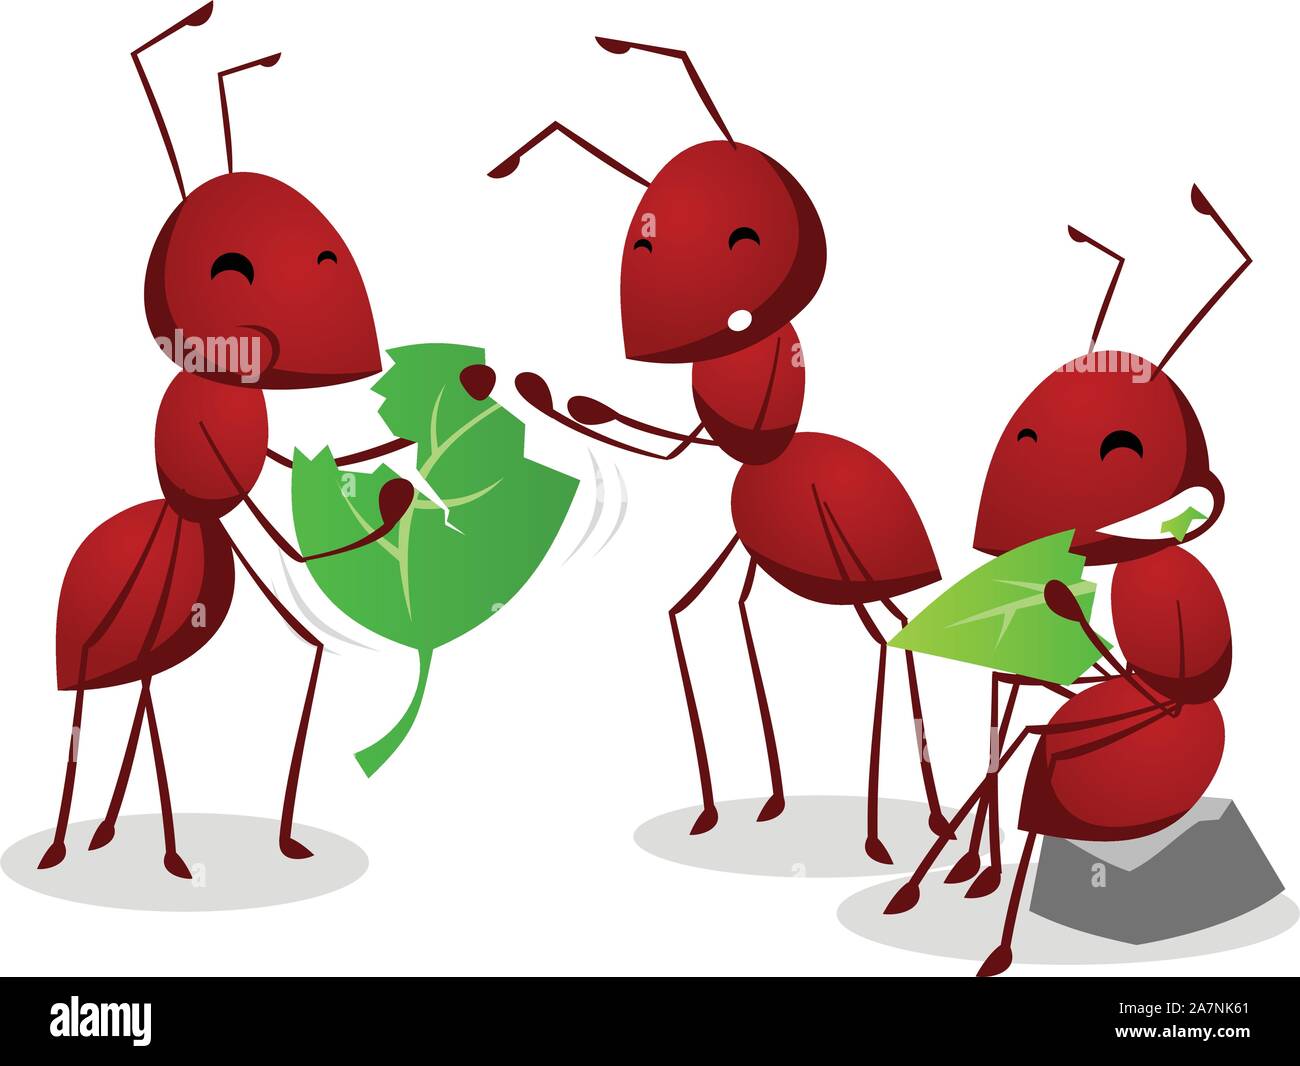 Group of three cartoon ants eating green leafs together, three brown ants vector illustration. Stock Vector